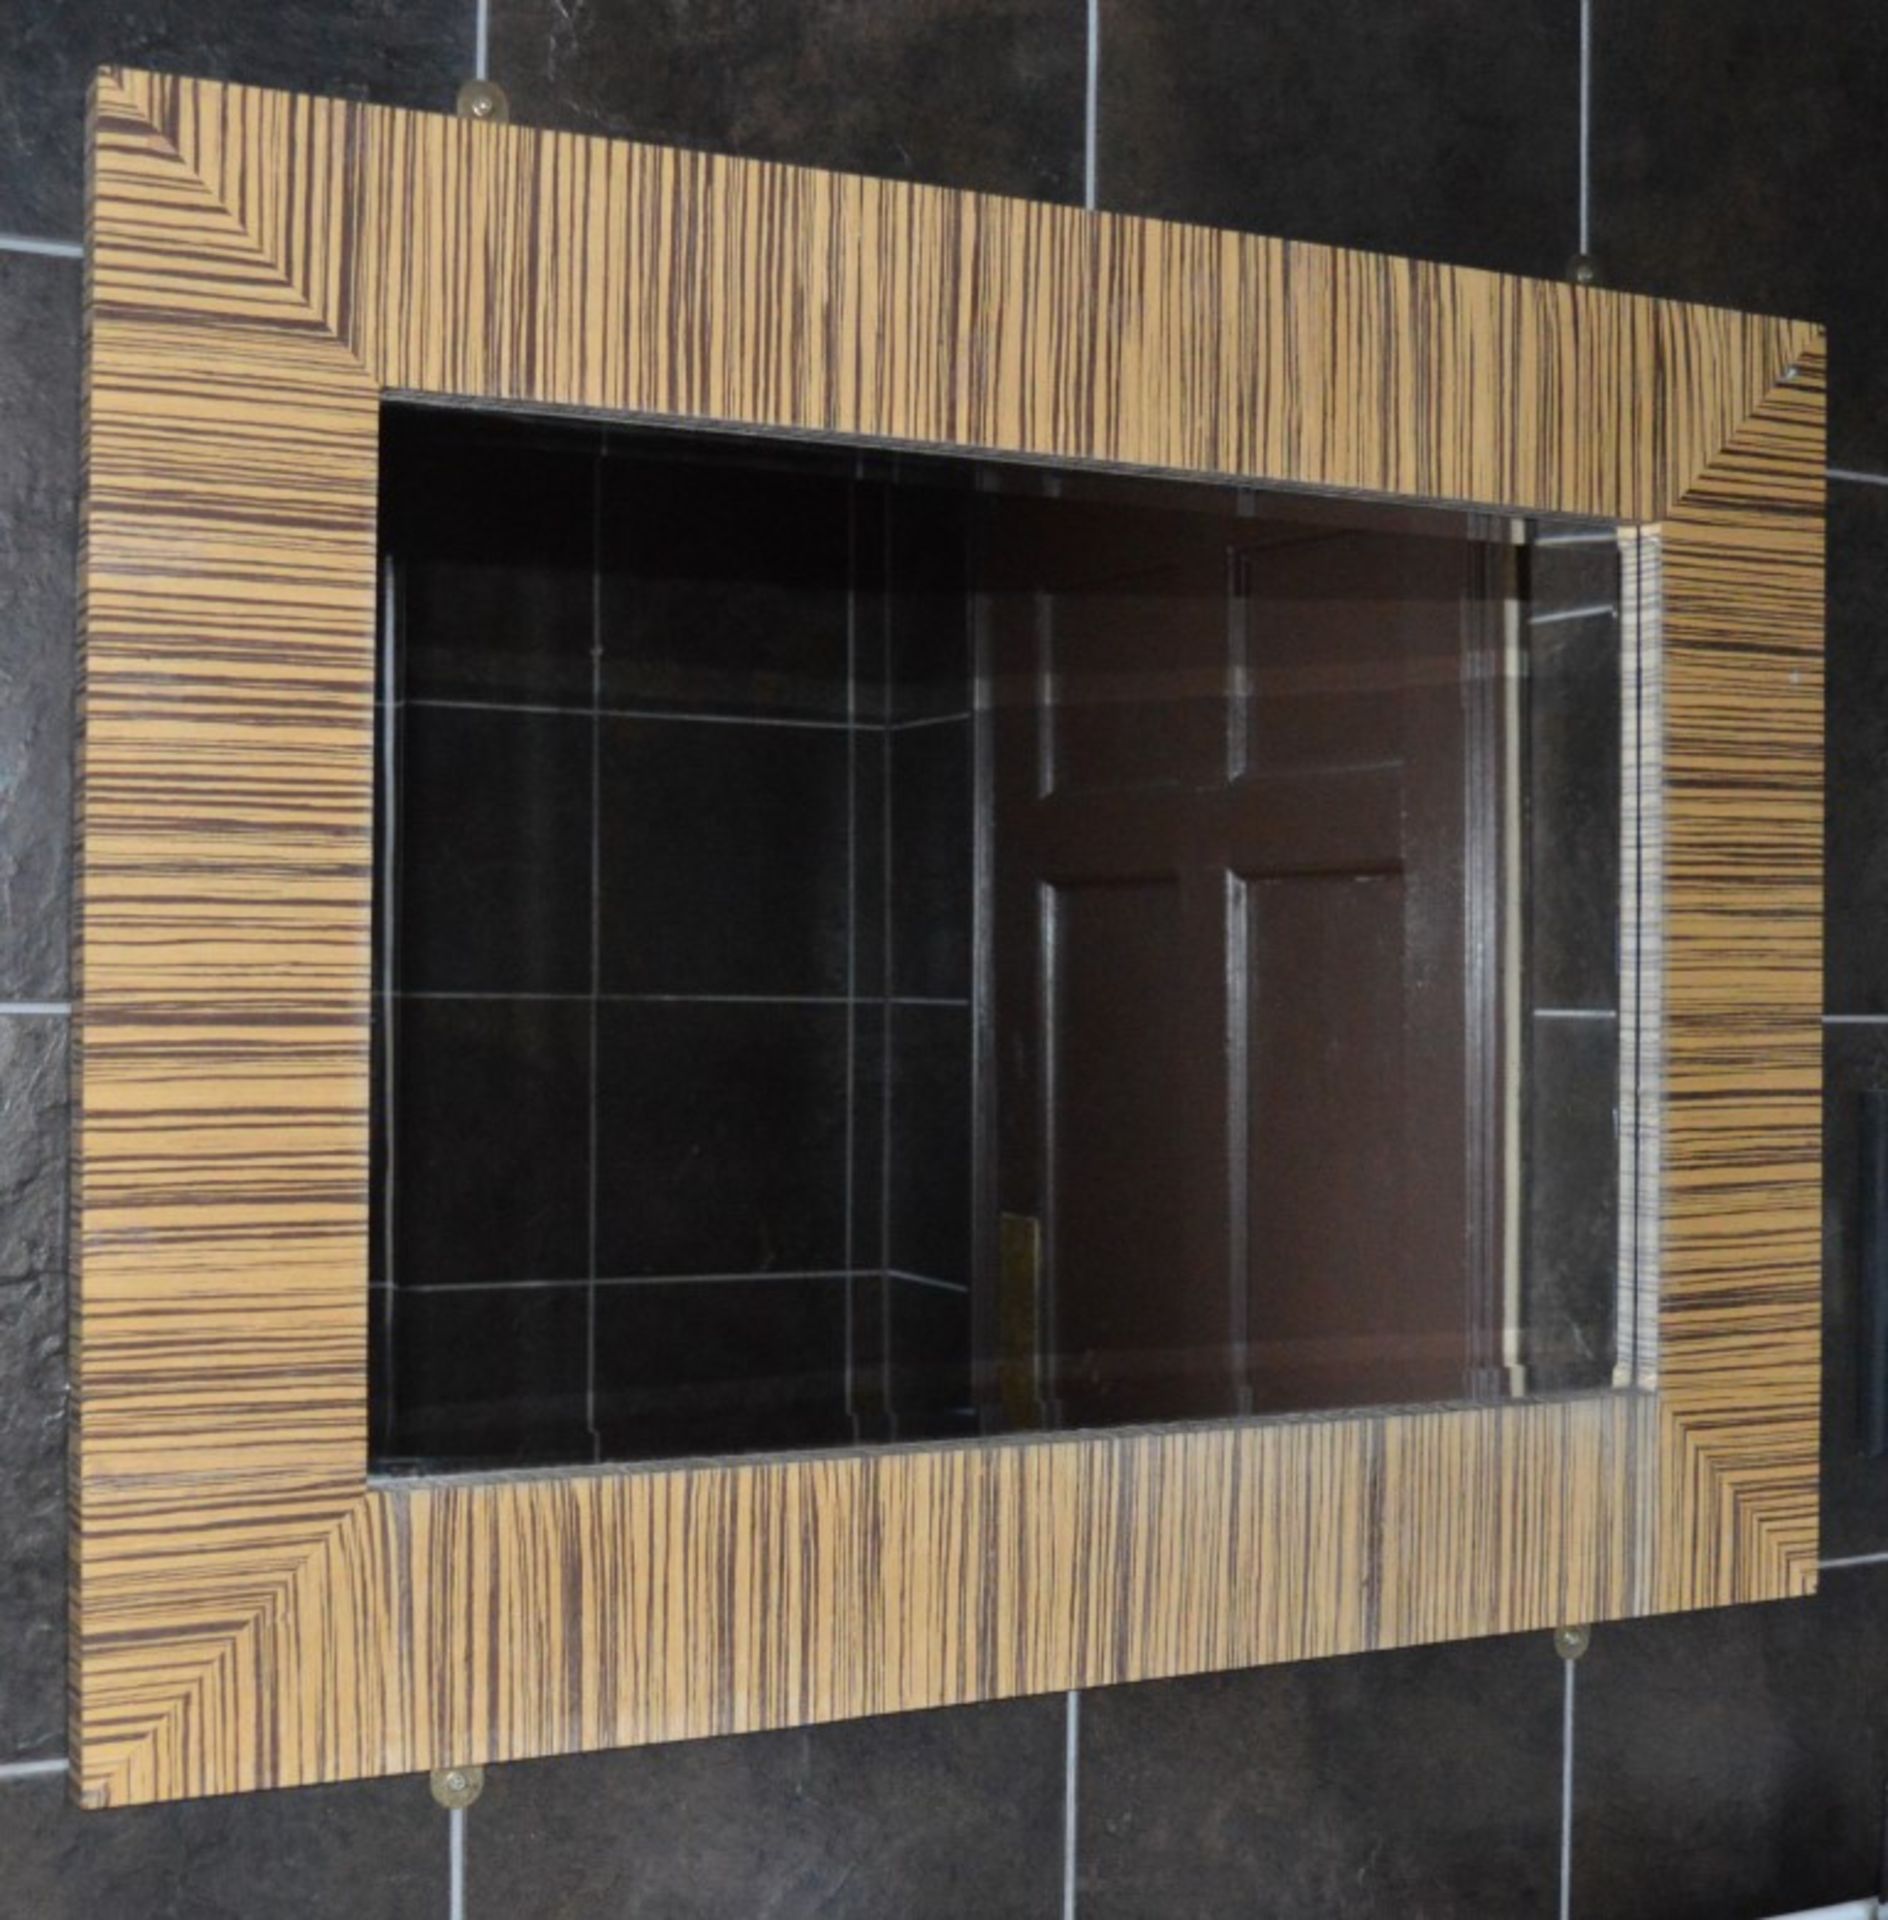 1 x Zebrano Bevelled Glass Wall Mirror - Contemporary Design - Perfect For The Home or Nightclub -